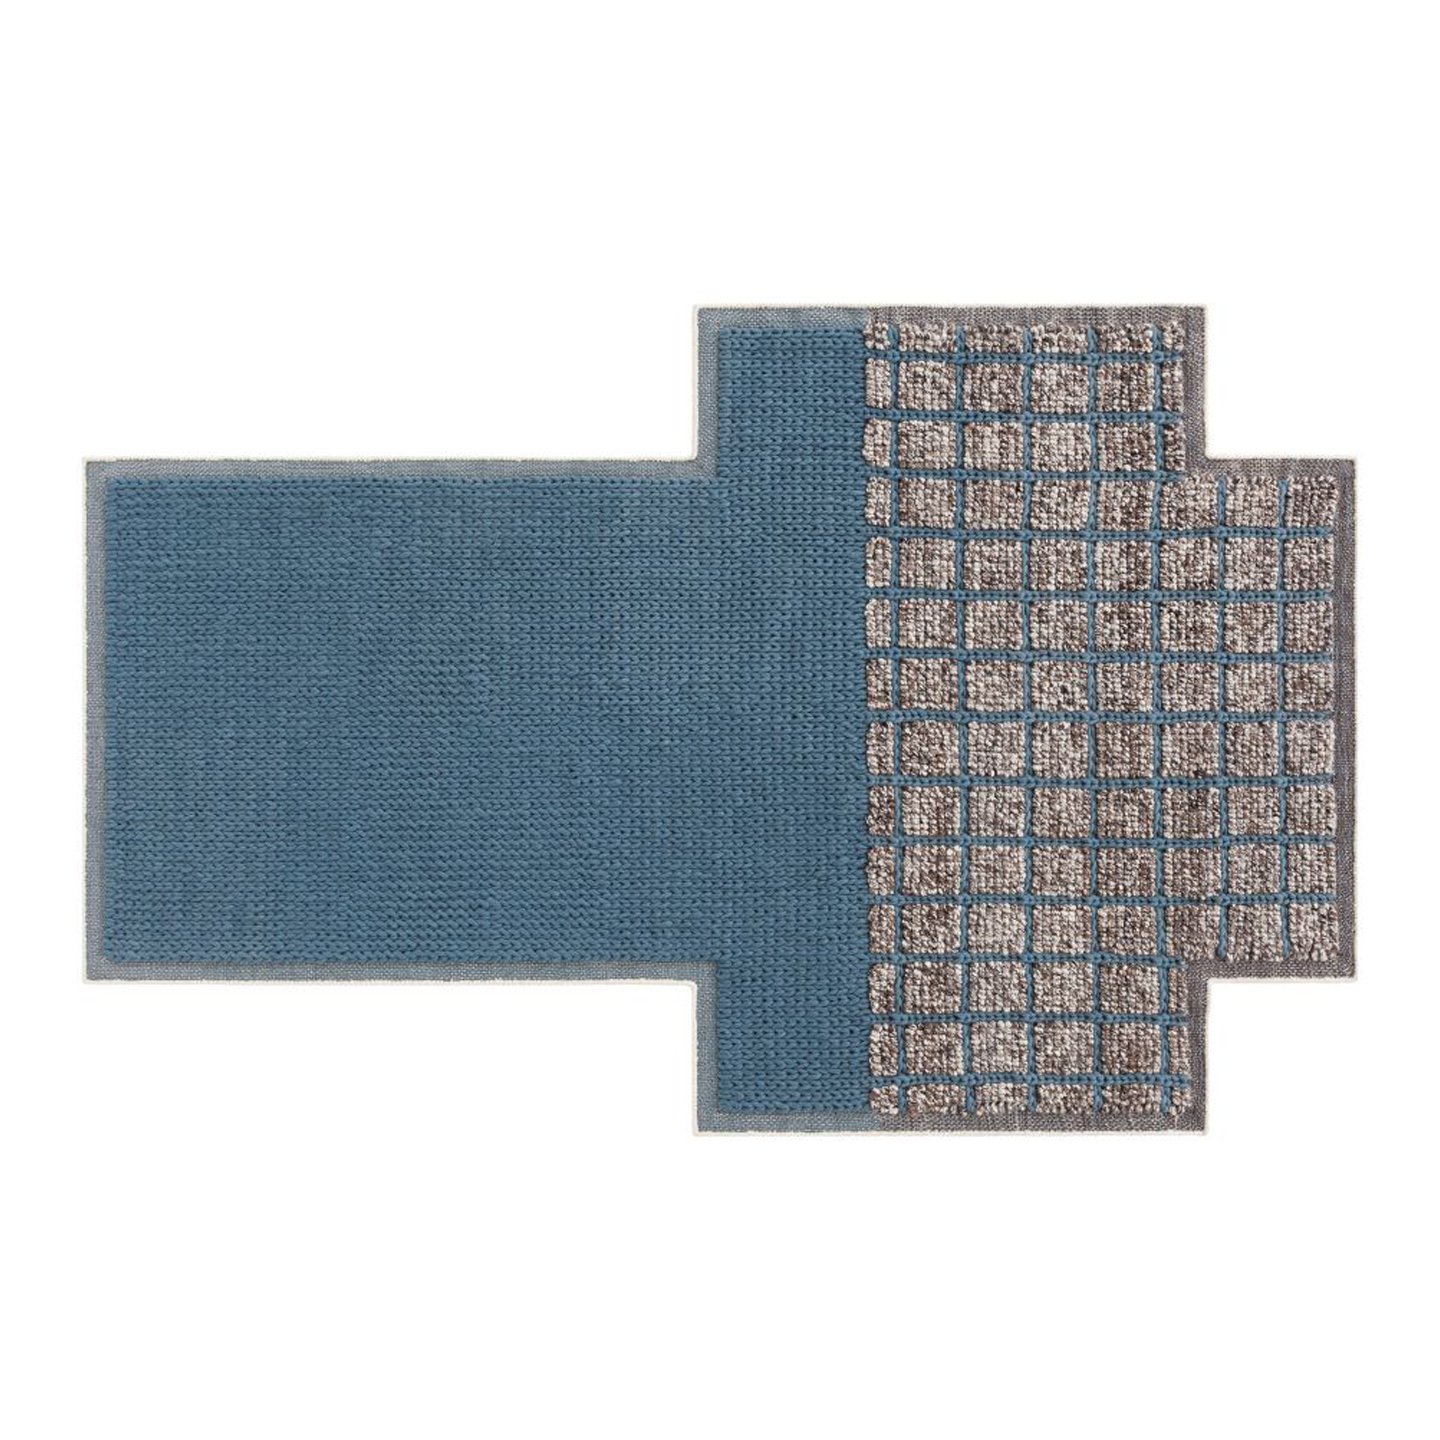 Haworth Mangas Space Rug in blue and grey color with square pattern